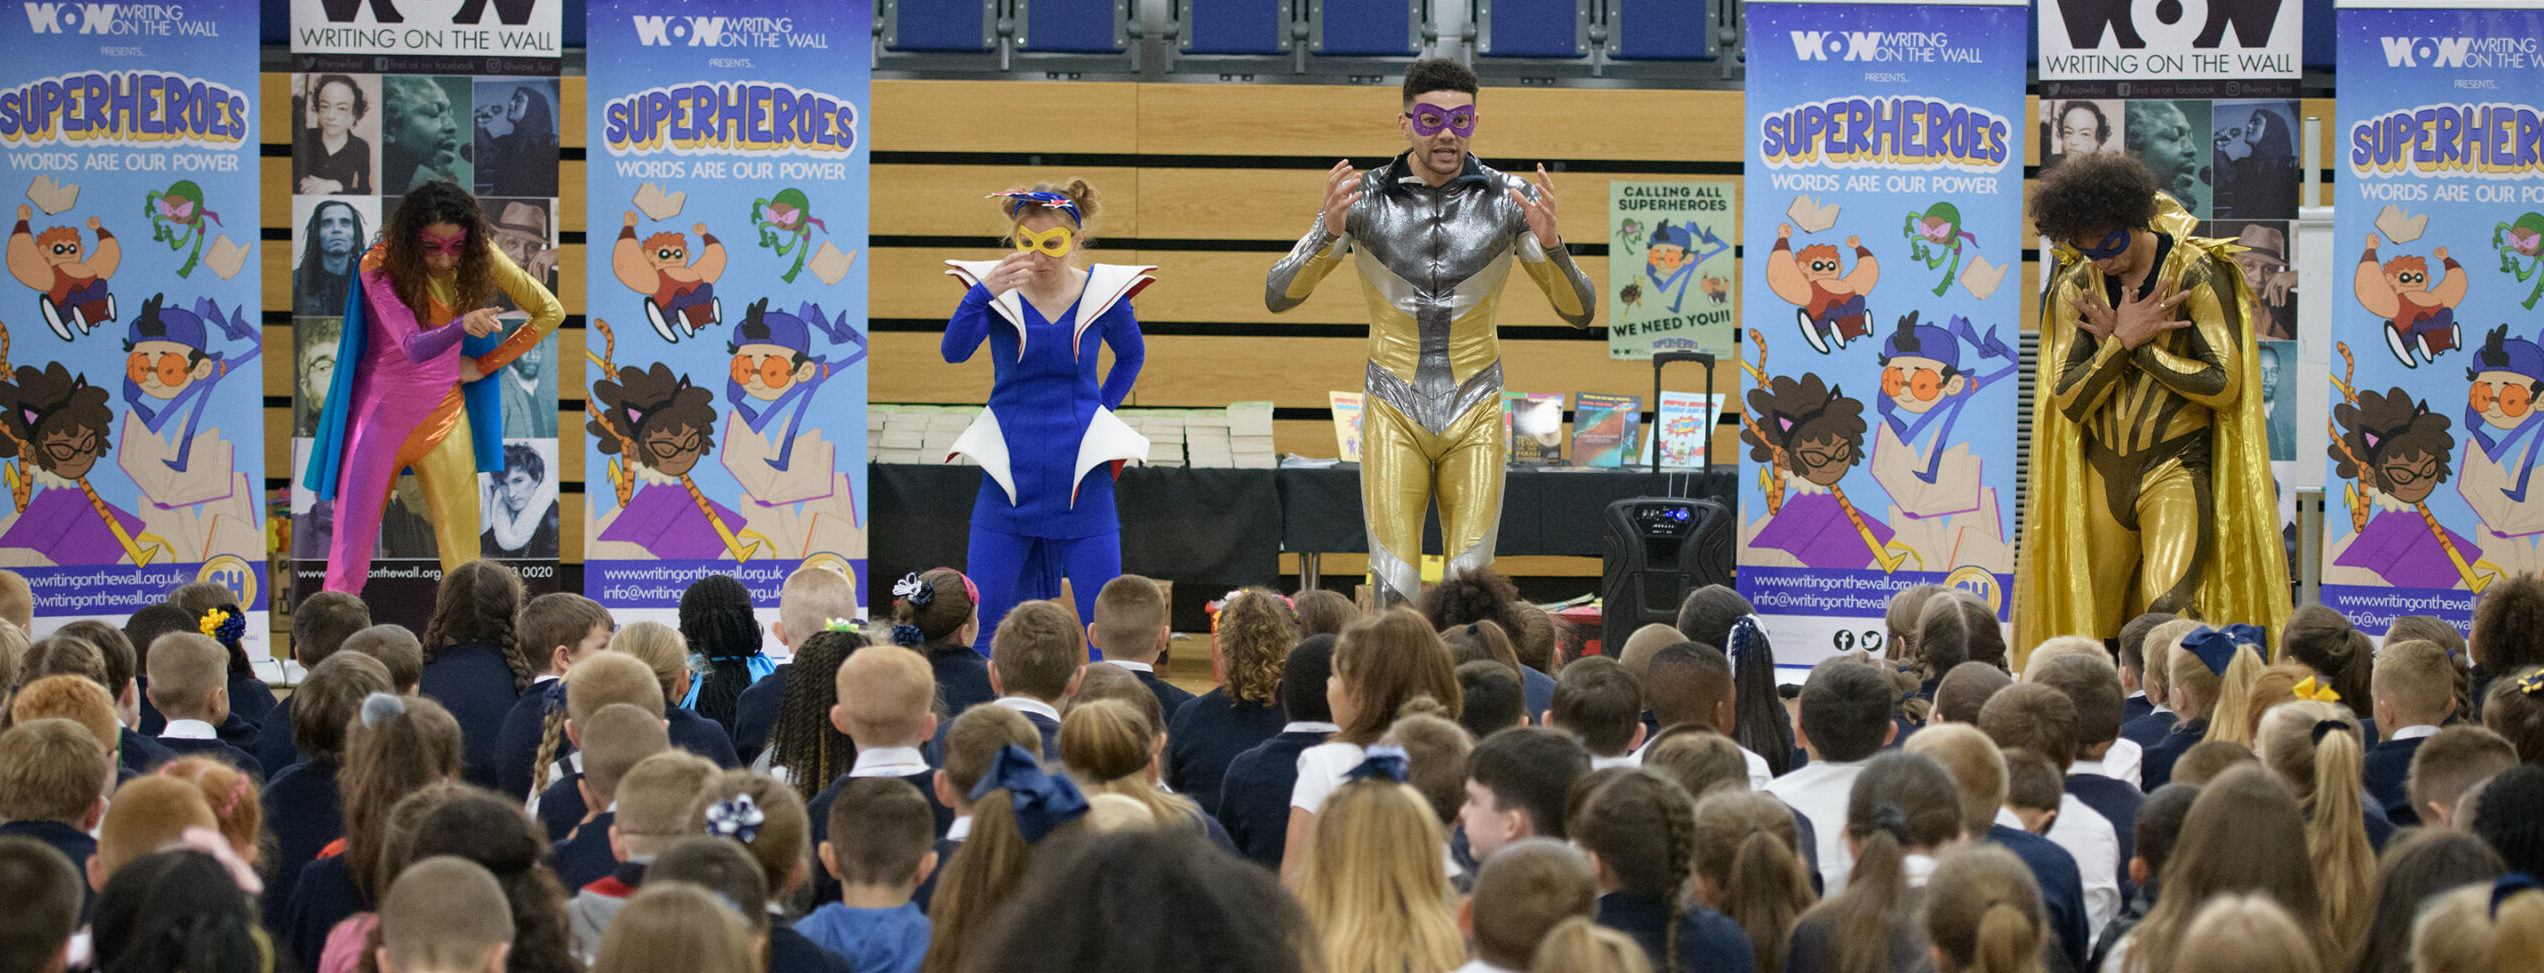 School children listen and watch attentively to four performers, dresses as superheroes, for the WoW Words are our Power project.